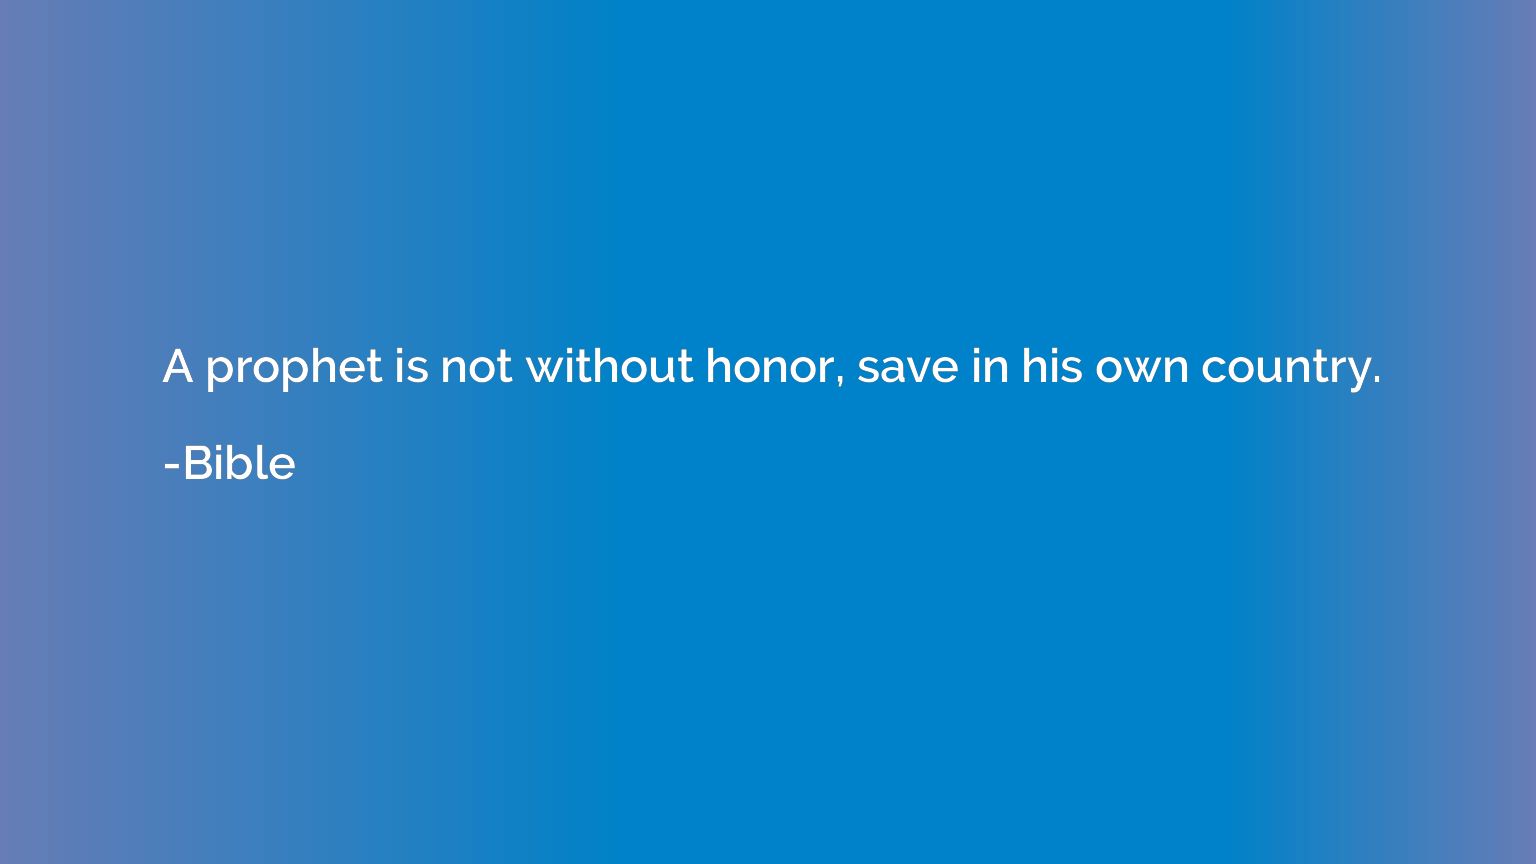 A prophet is not without honor, save in his own country.